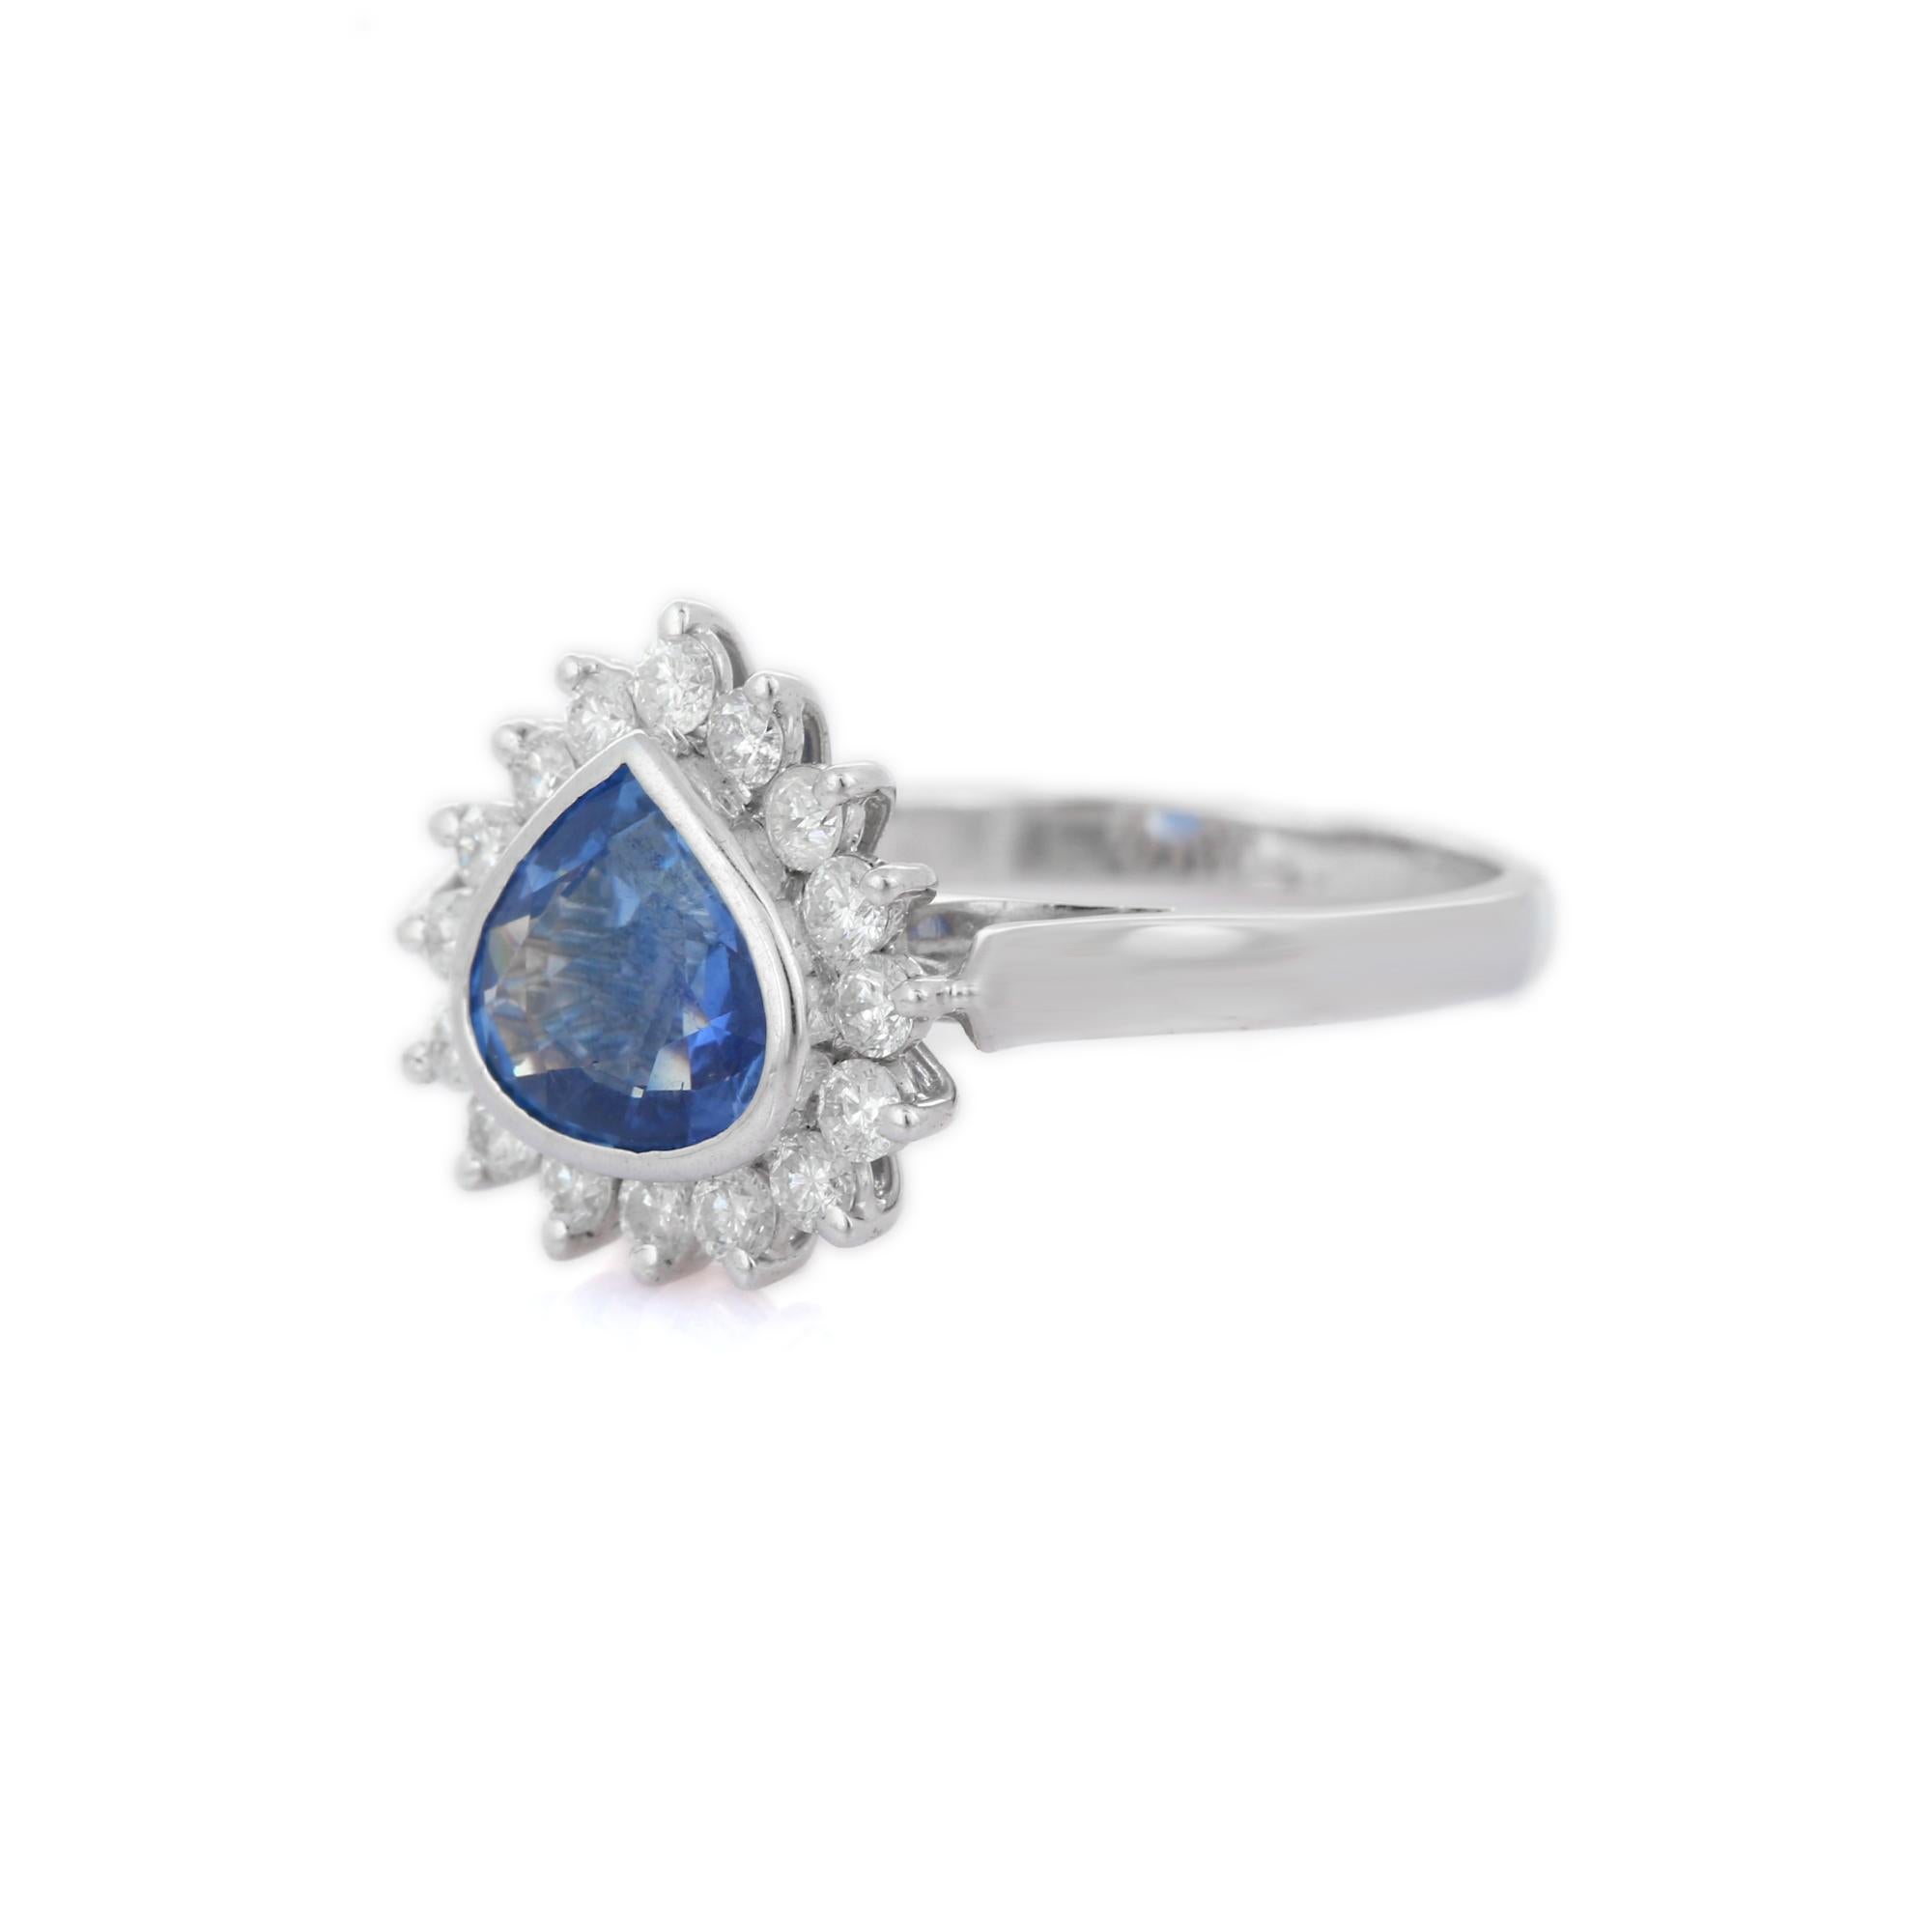 For Sale:  2.05 ct Blue Sapphire and Diamond Halo Engagement Ring in 18K White Gold 2